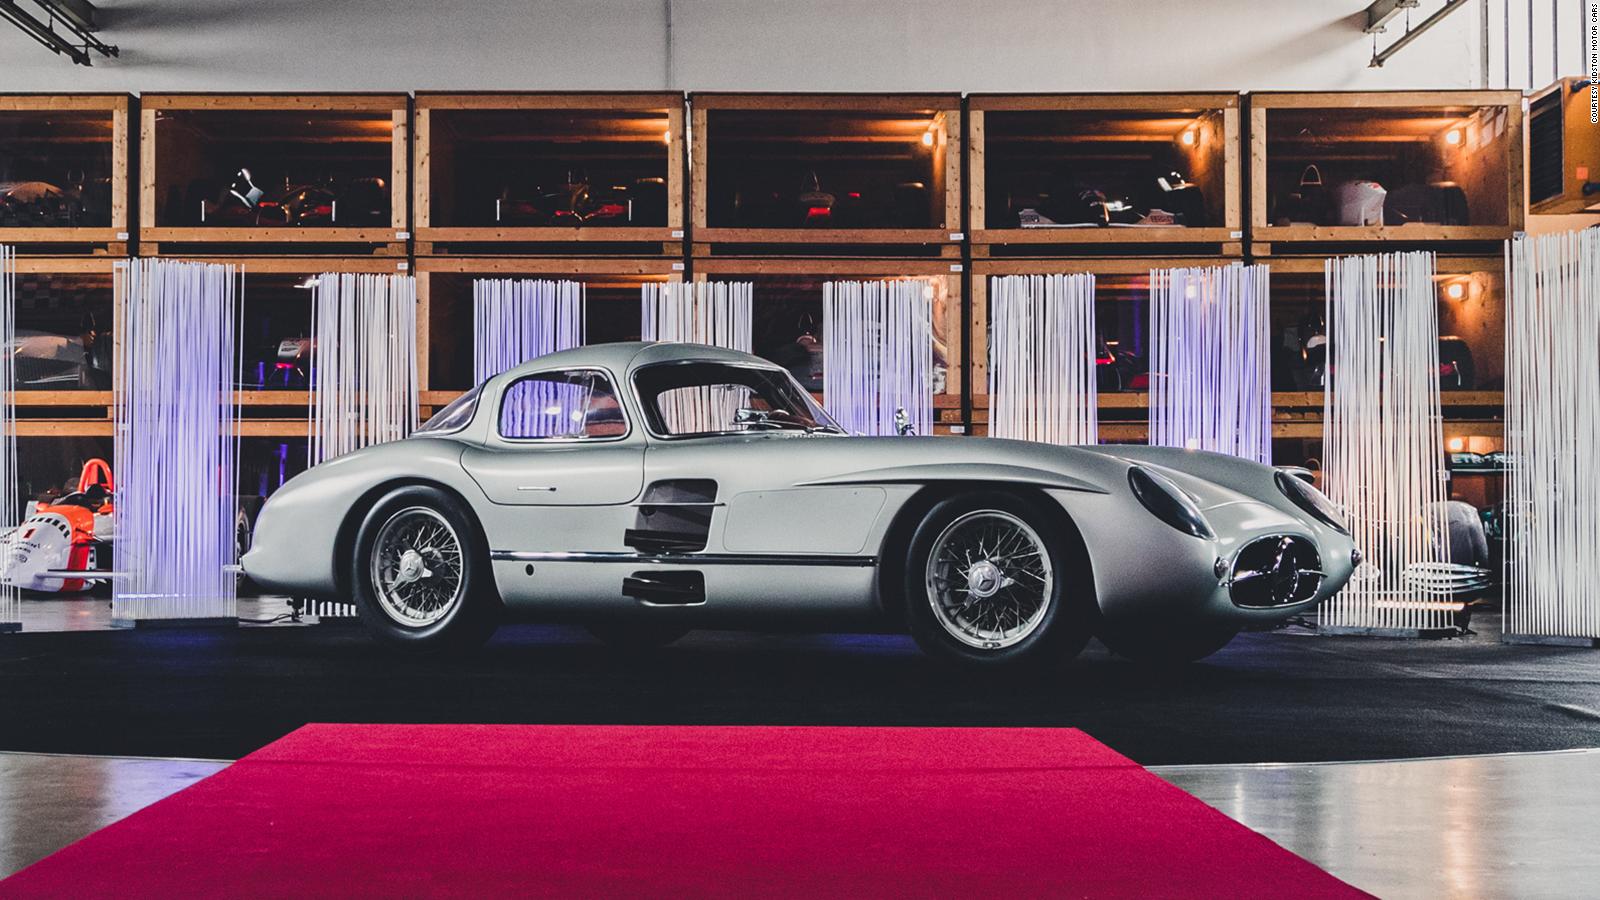 Mercedes just sold the world’s most expensive car for 2 million